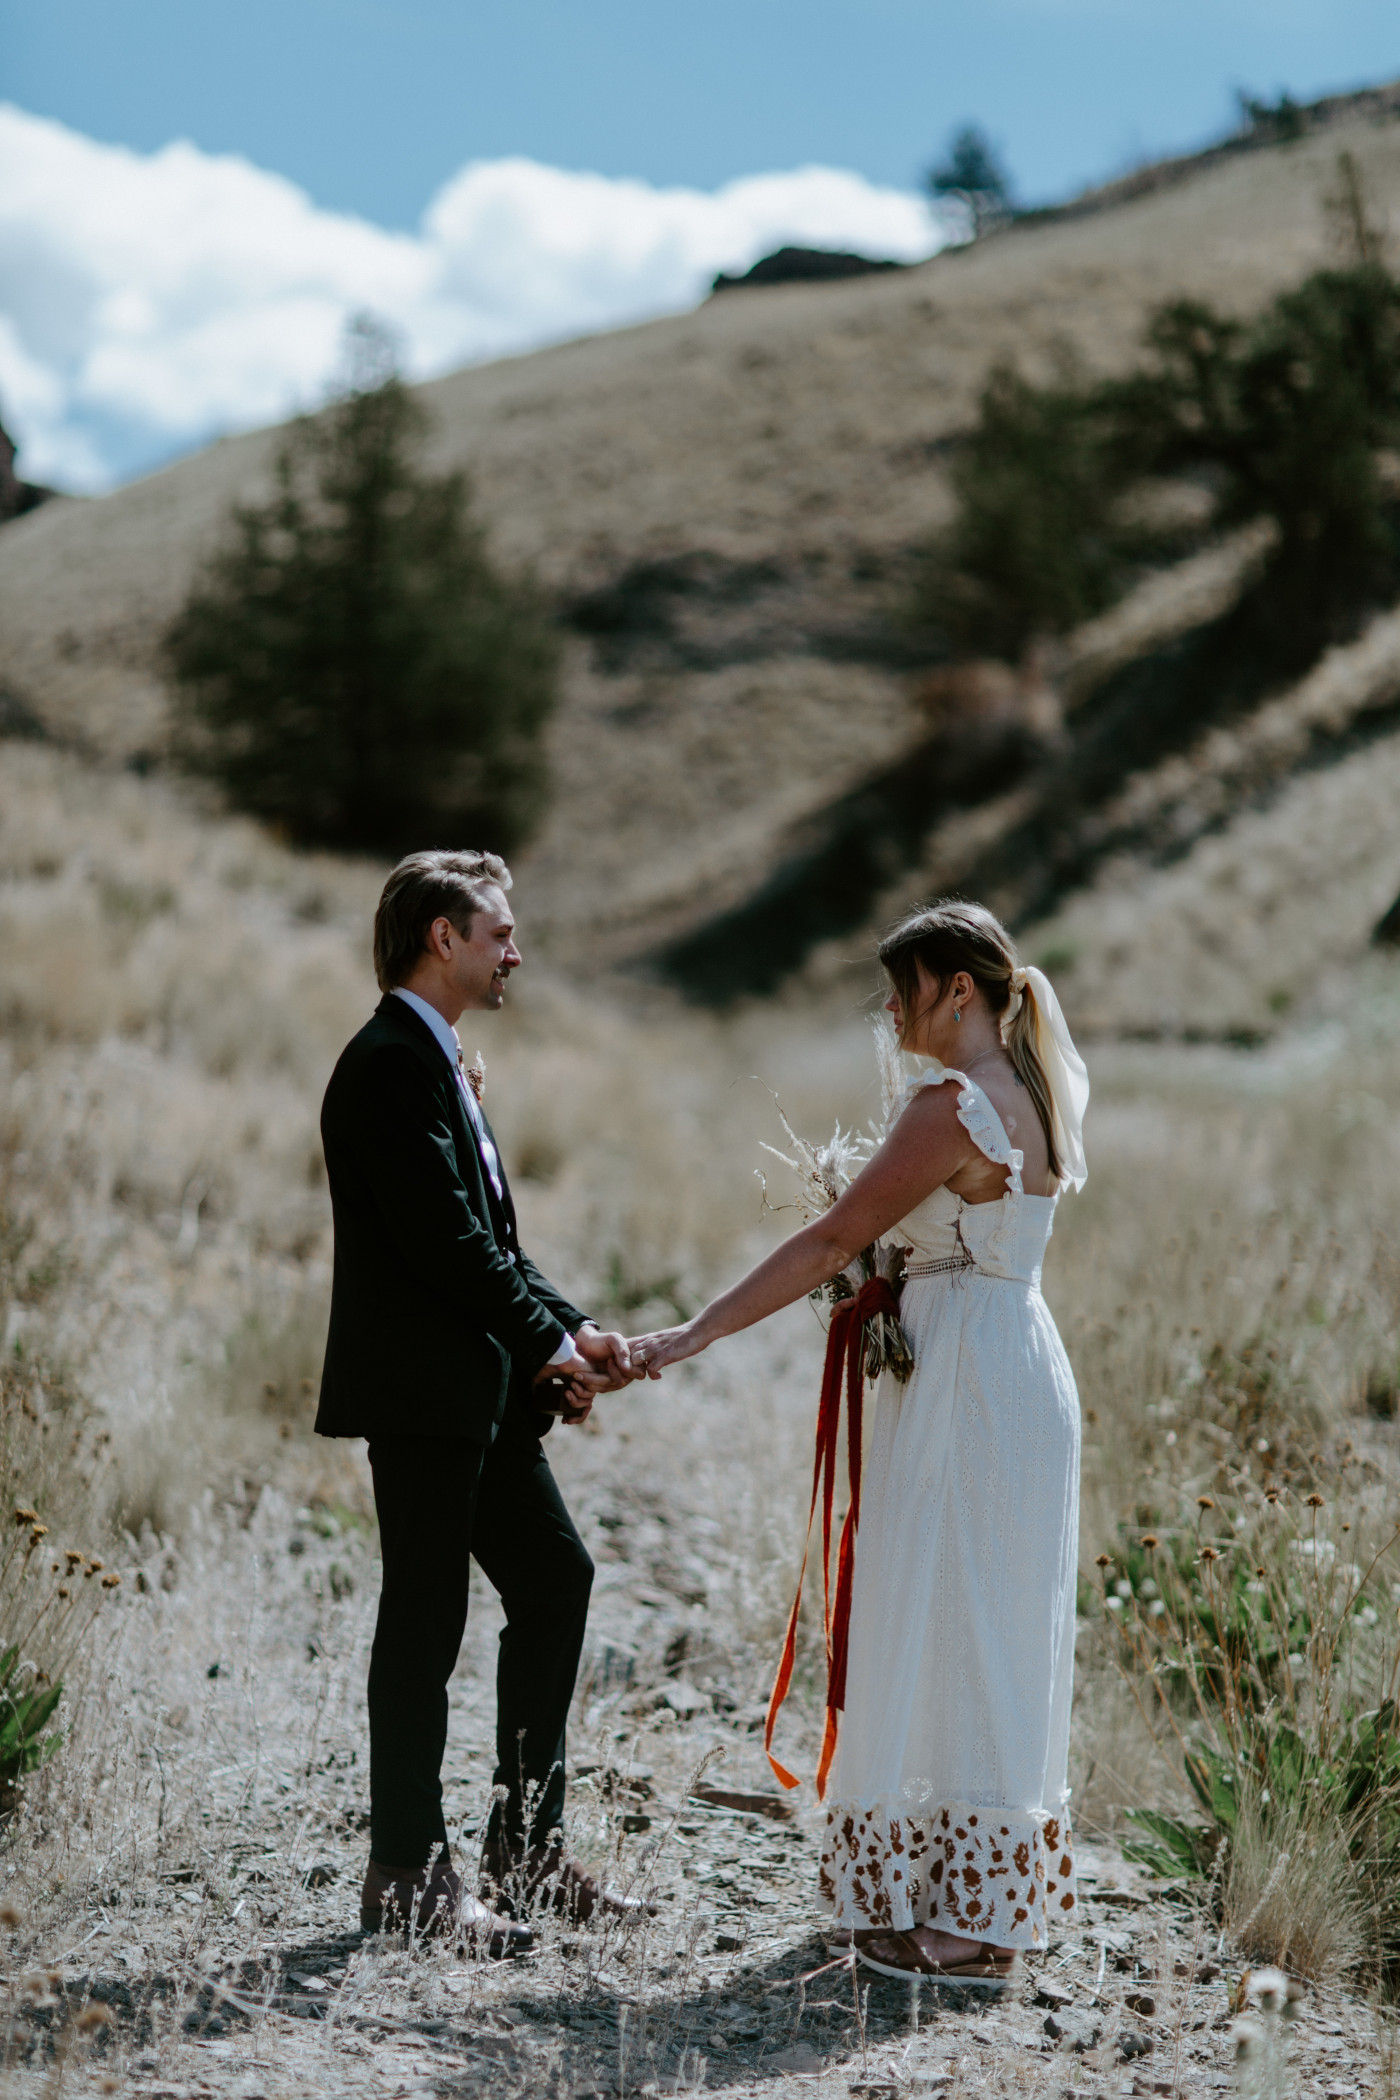 Greyson and Emily hold hands during their elopement ceremony. Elopement photography in the Central Oregon desert by Sienna Plus Josh.